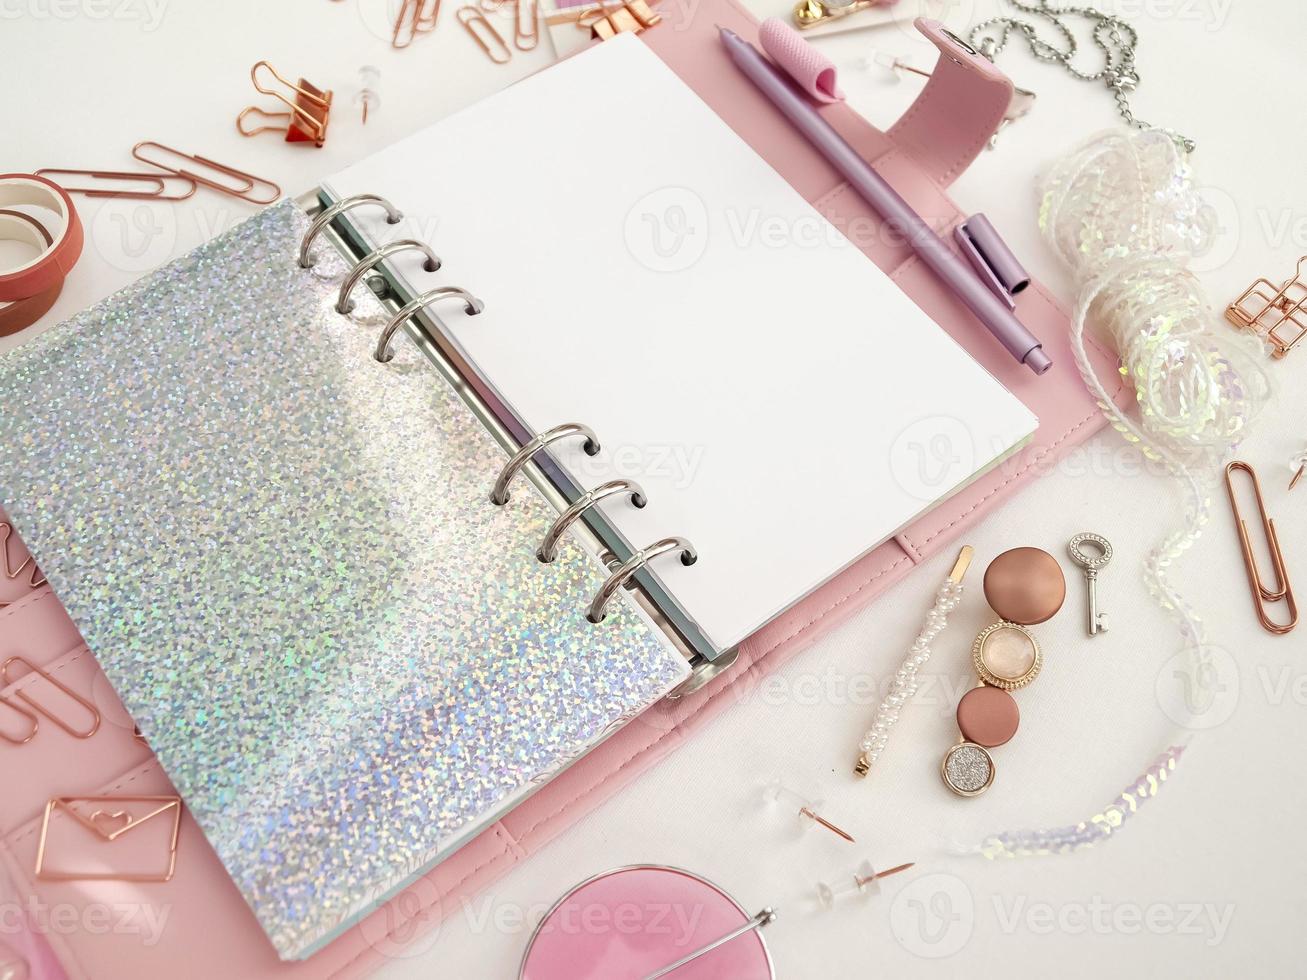 Diary opens with white and holographic page. Pink planner with cute stationery photographing in flatlay style. Top view of pink planner with business stationery. Pink glamour planner decoration photo